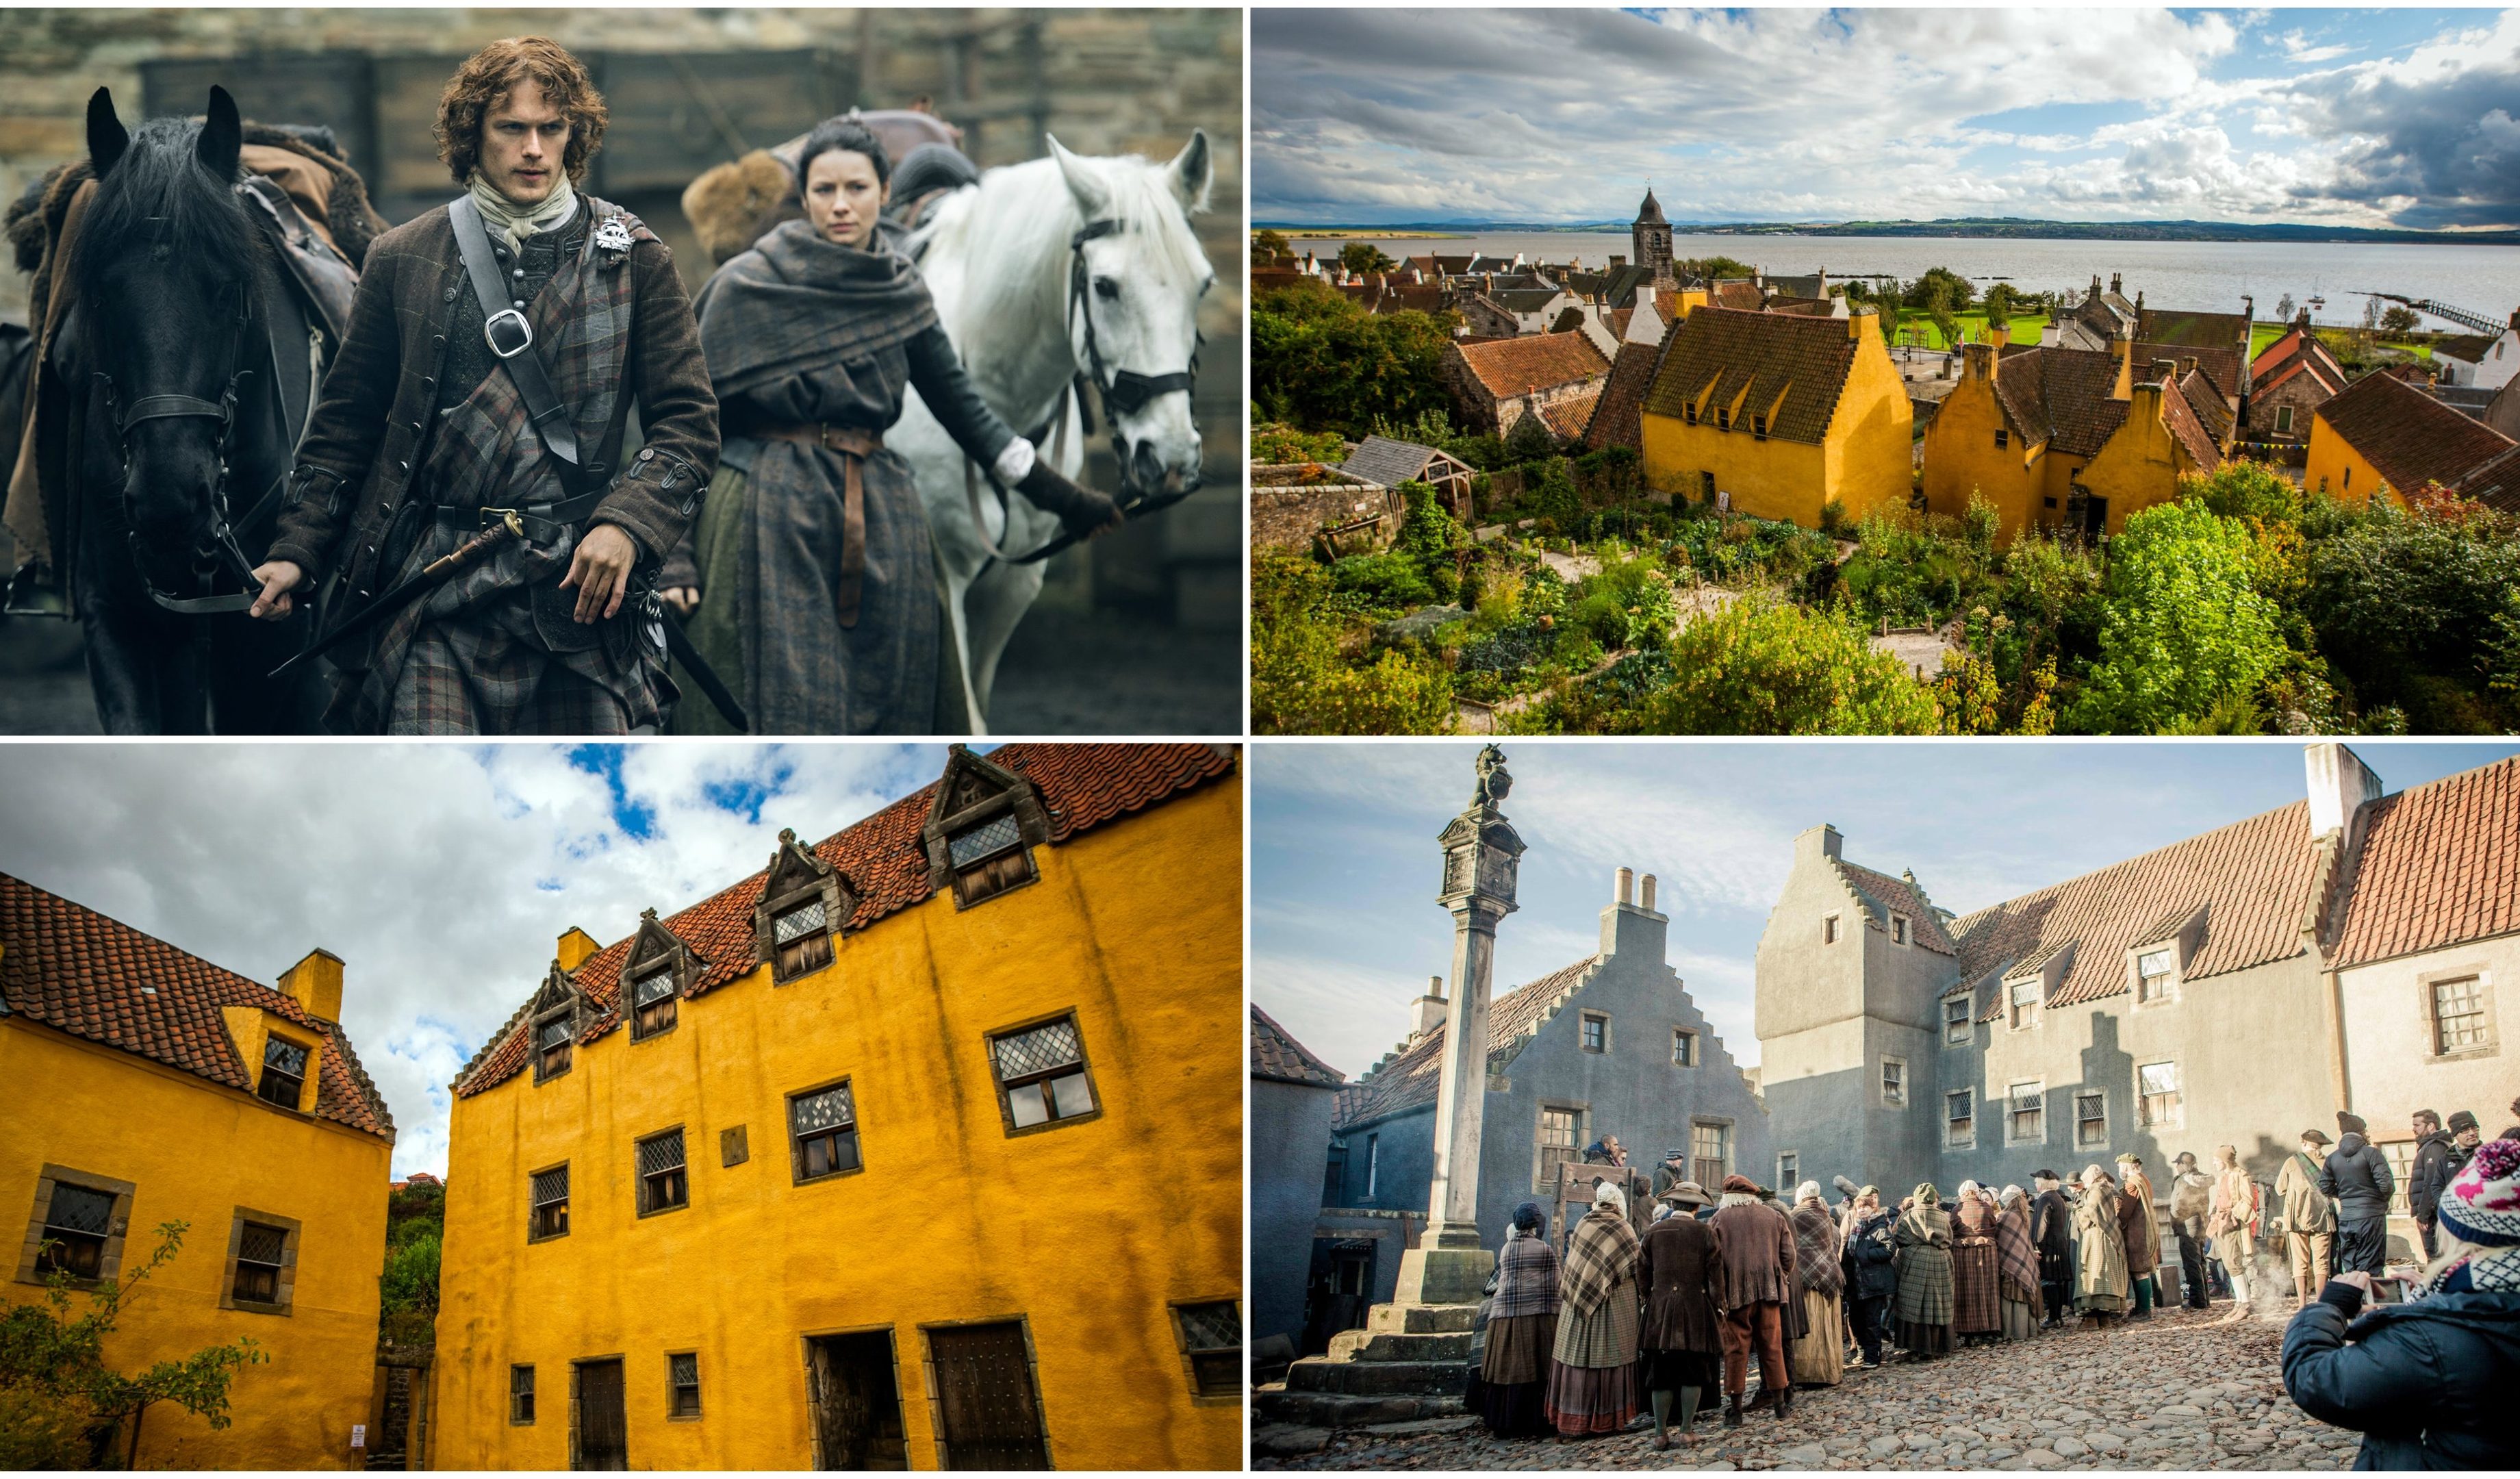 Outlander will return to the historic village of Culross next week